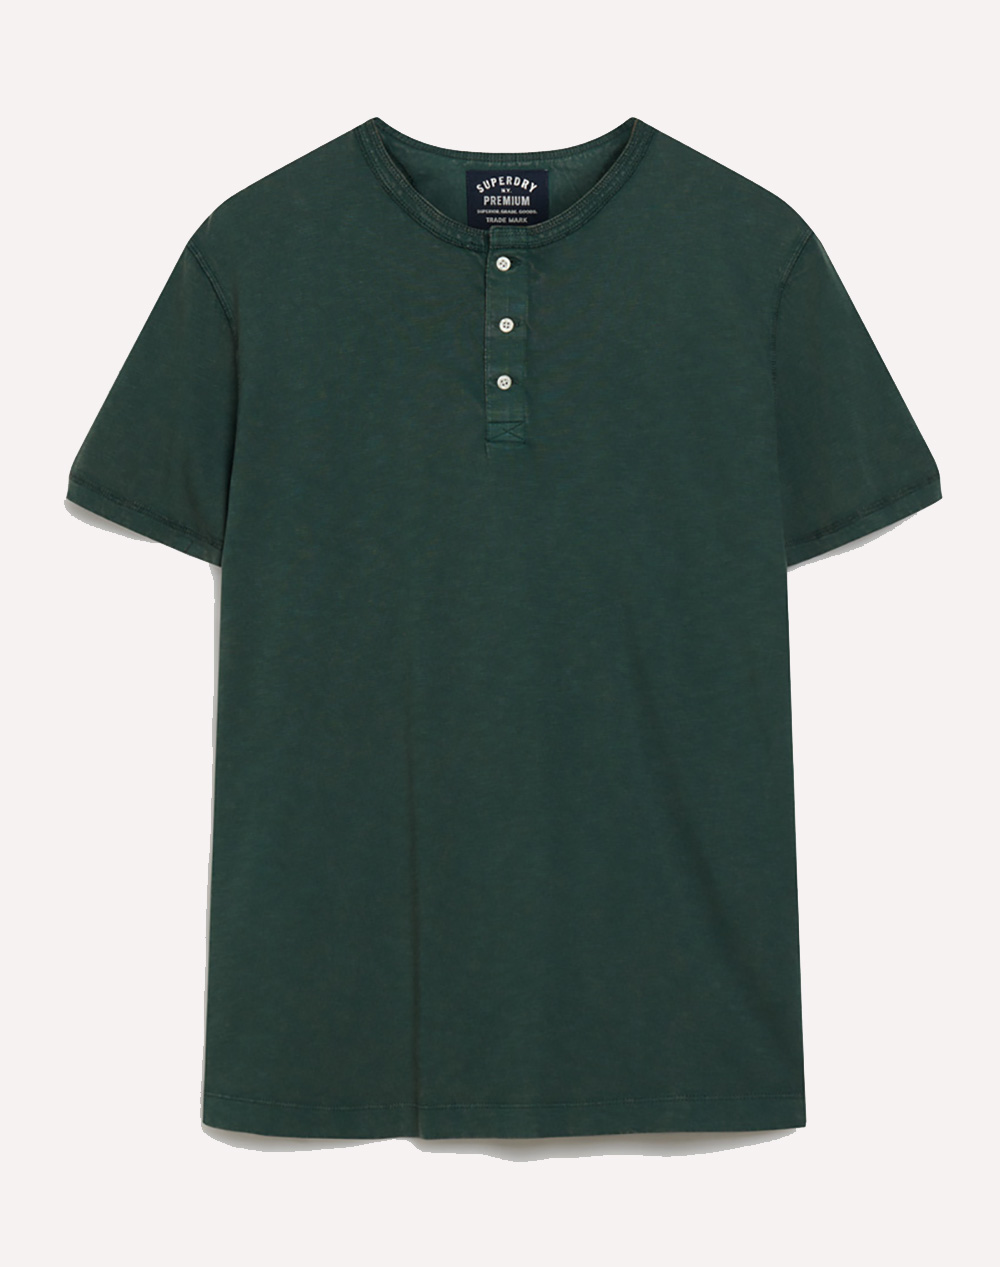 SUPERDRY D2 STUD SS JERSEY GRANDAD TOP ΜΠΛΟΥΖΑ ΑΝΔΡΙΚΟ M1011890A-FPX Green 3820ASUPE3400326_XR30480